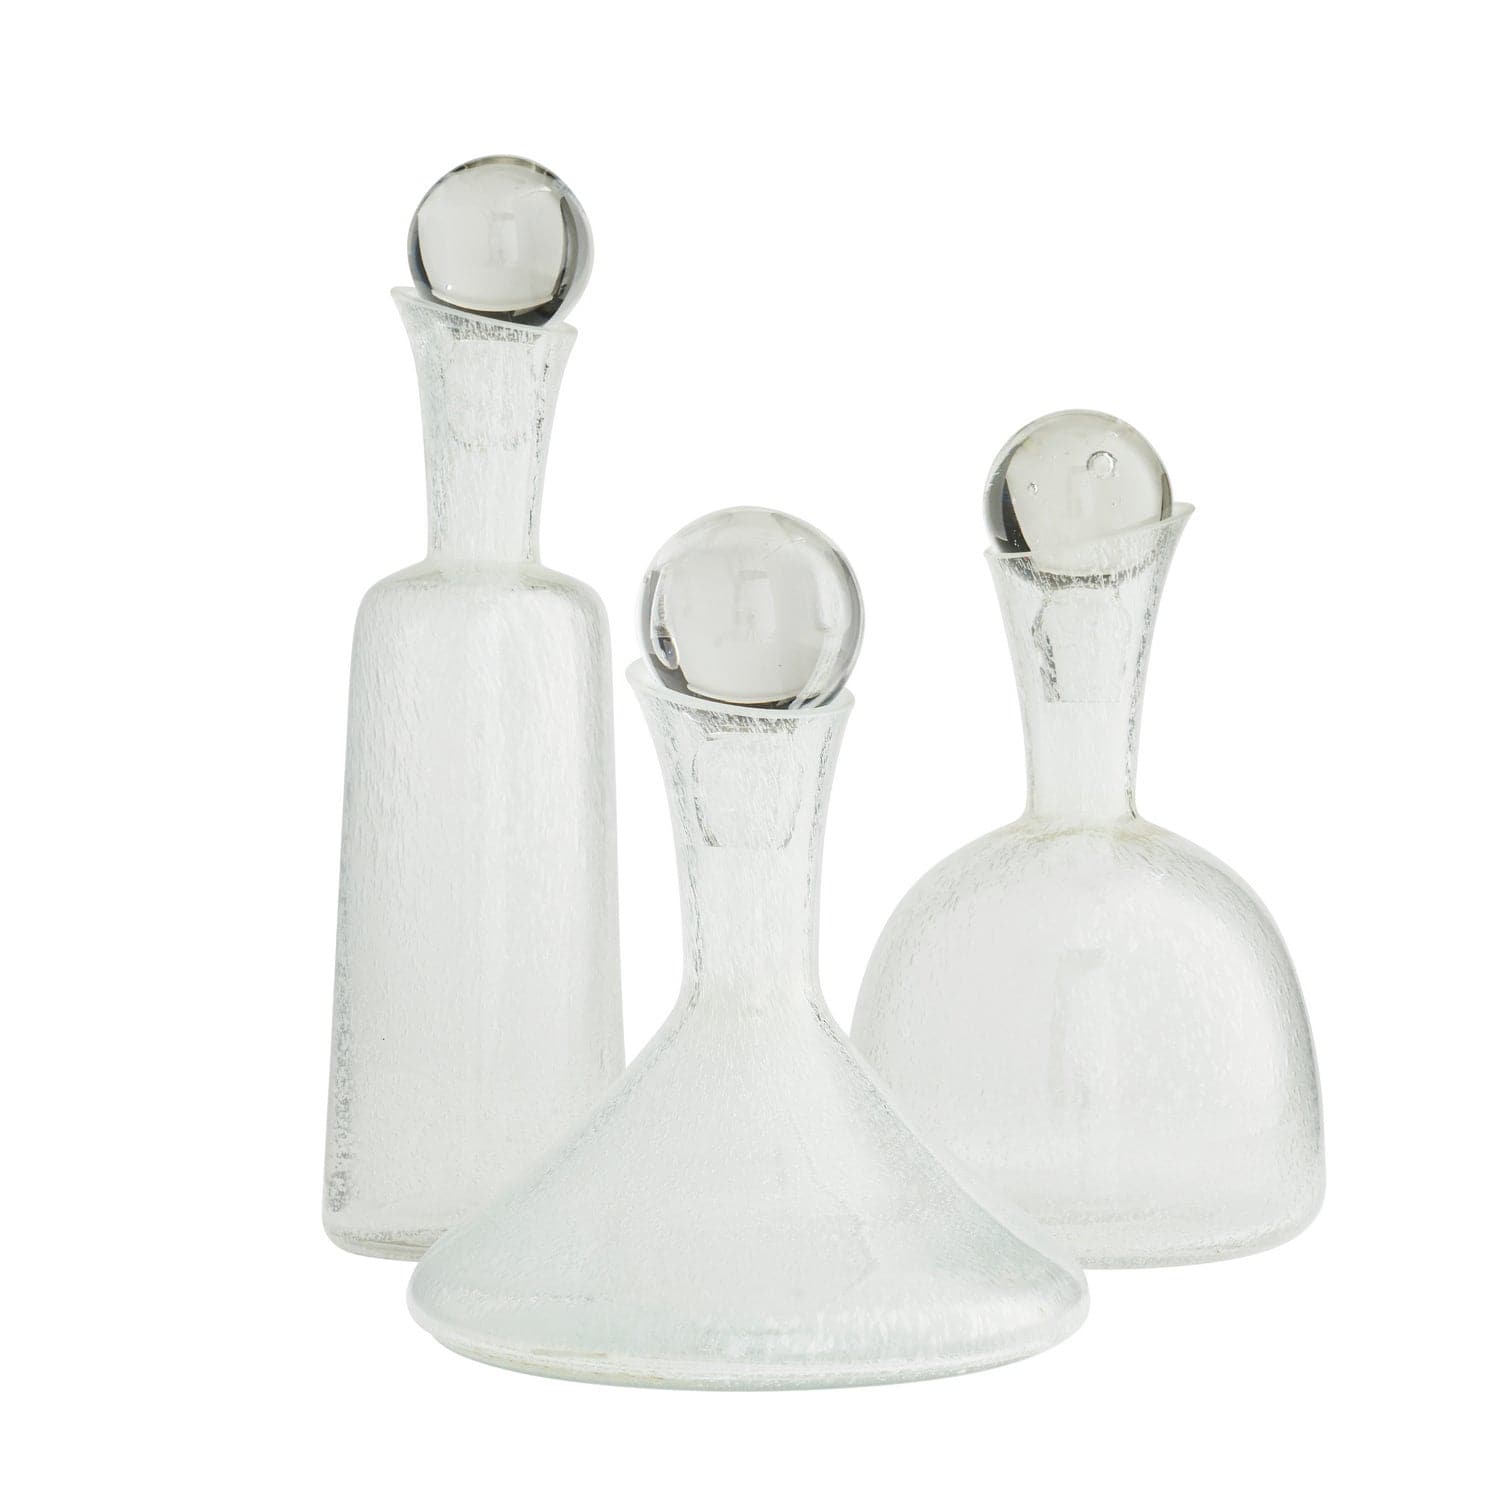 Arteriors - 7835 - Decanters - Gillmore - Clear